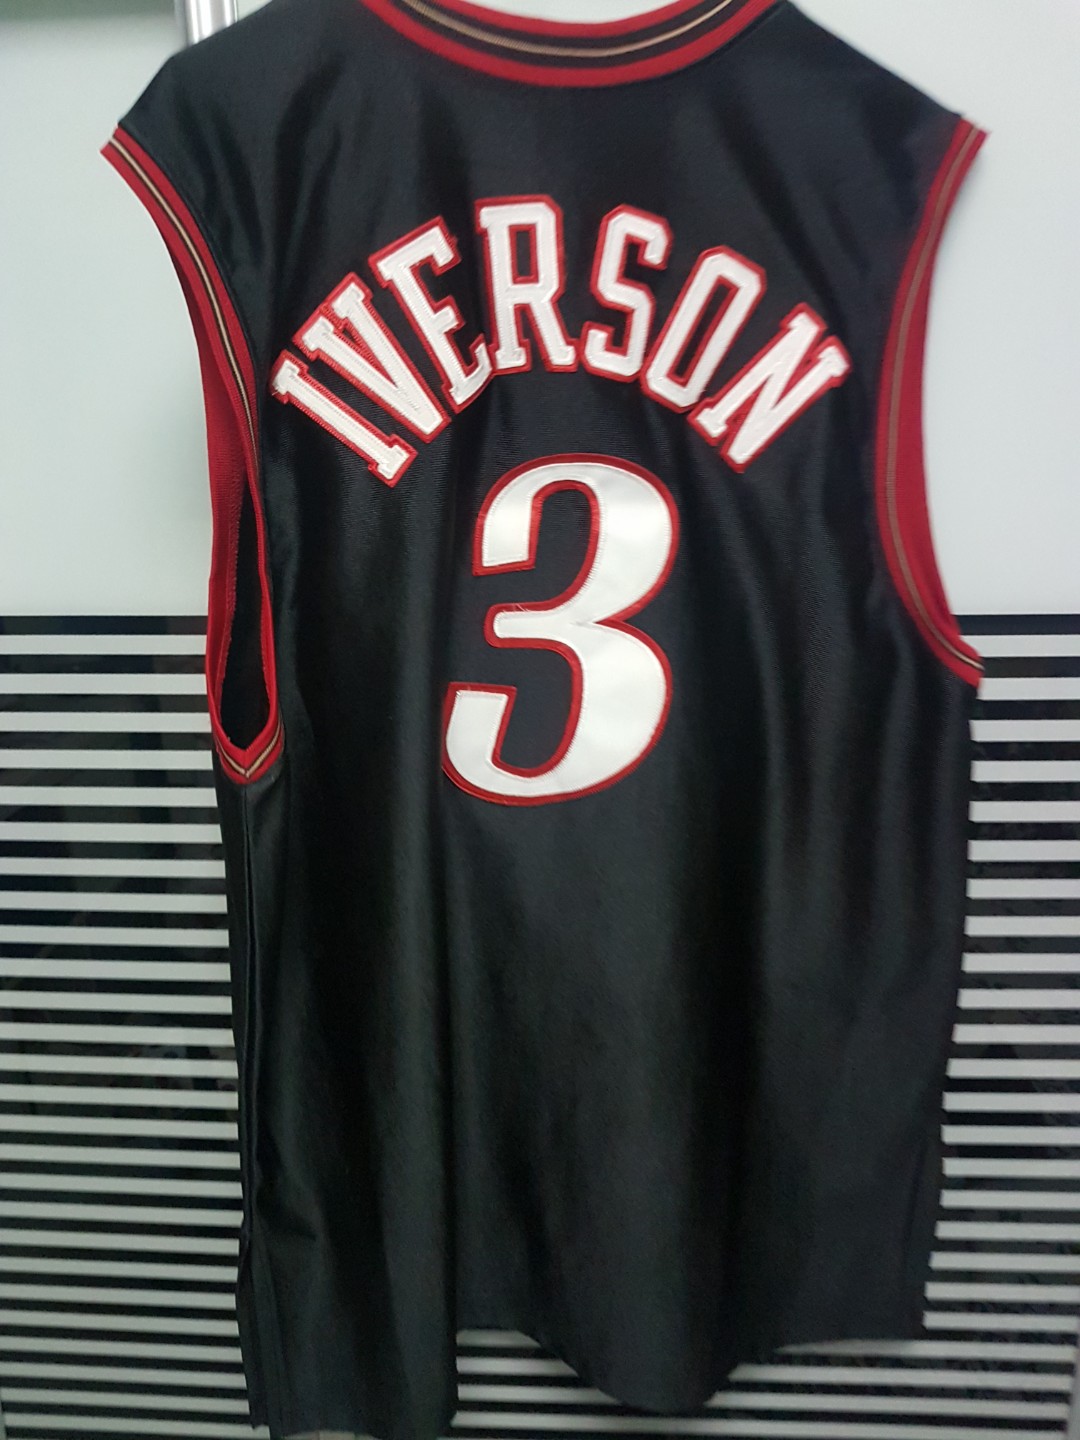 iverson jersey authentic